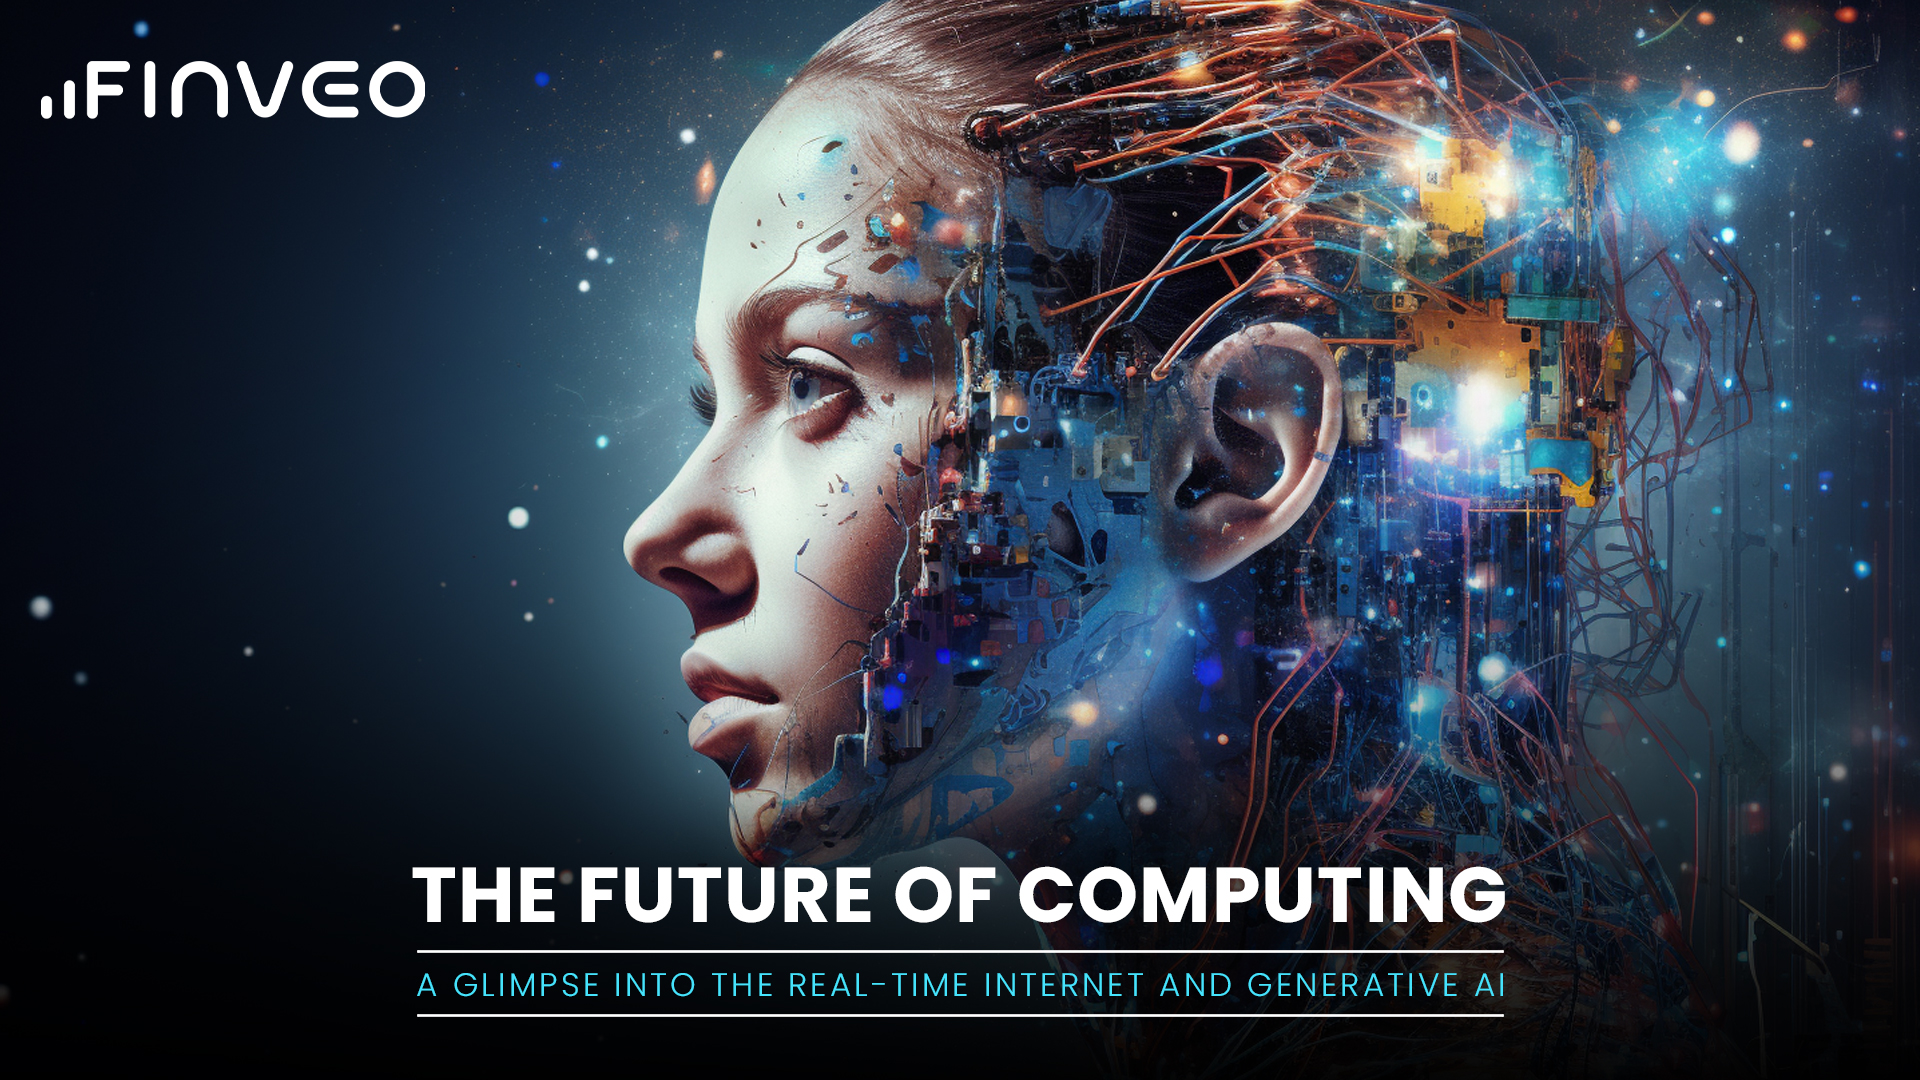 The Future of Computing: A Glimpse into the Real-Time Internet and Generative AI